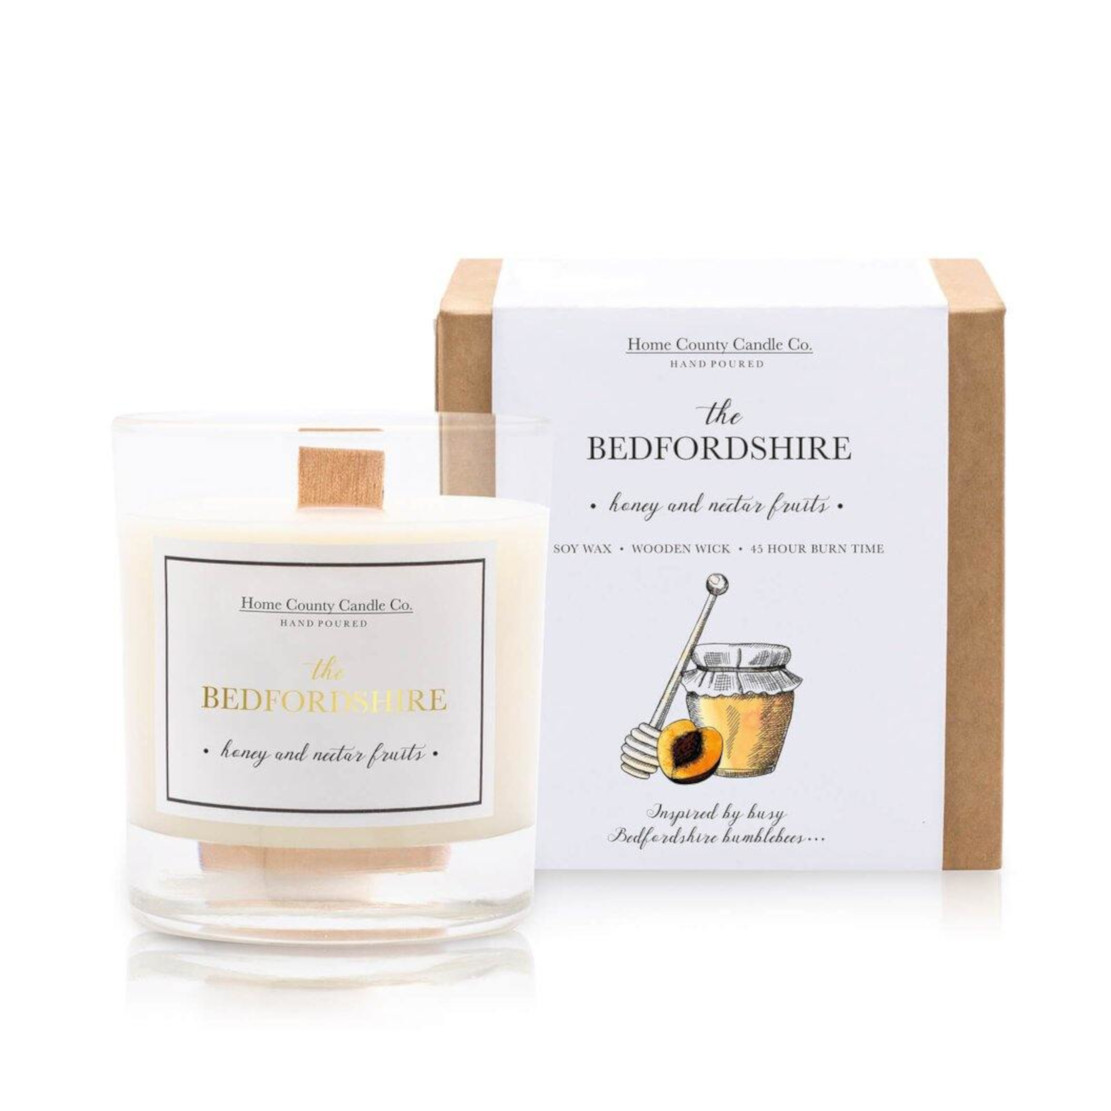 Home County Candle Bedfordshire 200g Soy Candle